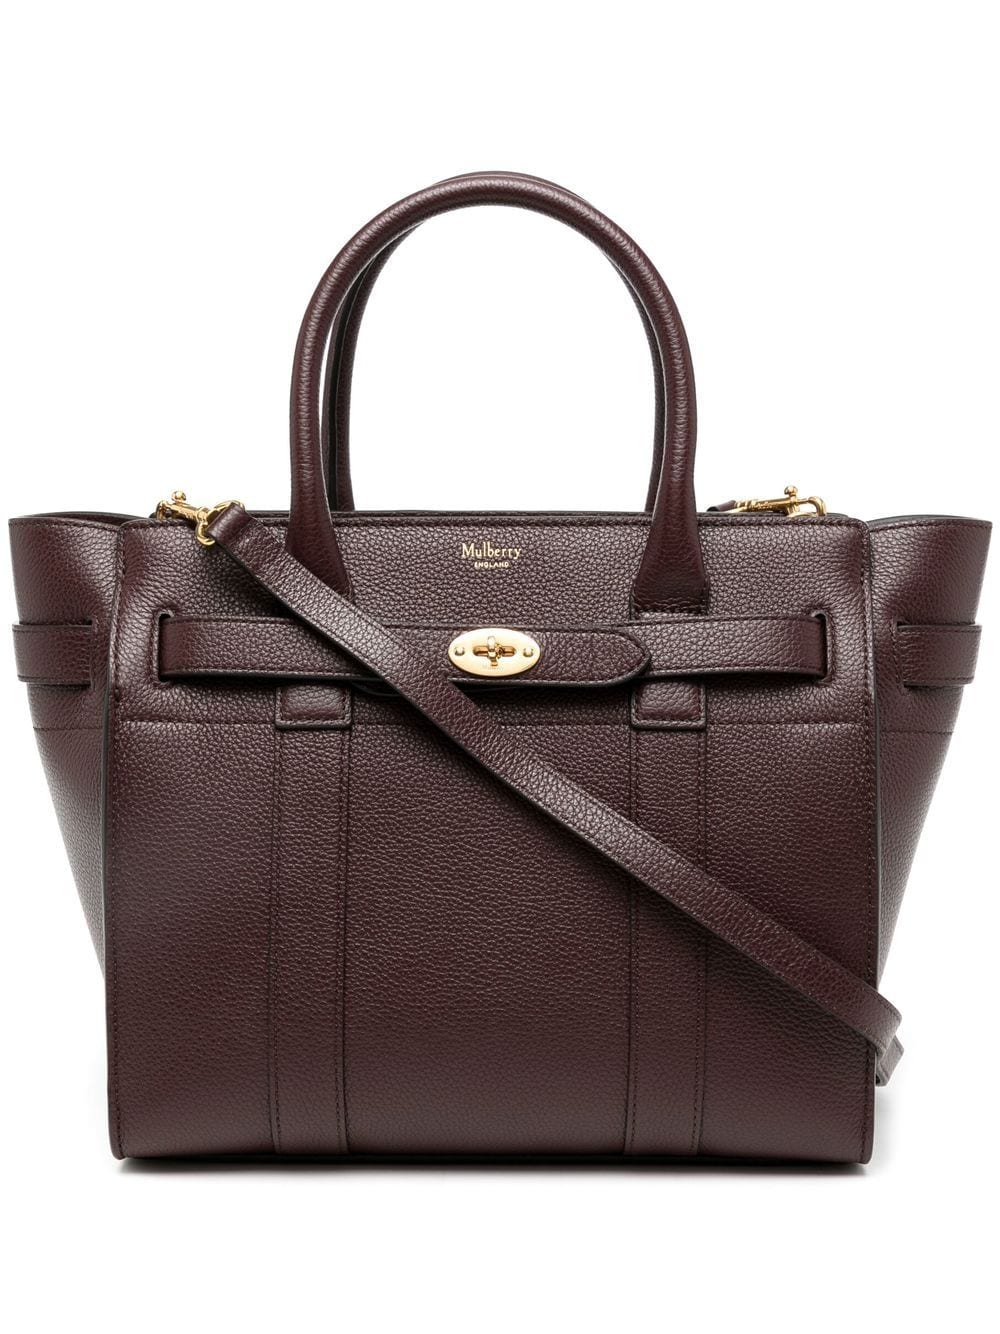 Mulberry small Bayswater zipped tote bag - Brown von Mulberry